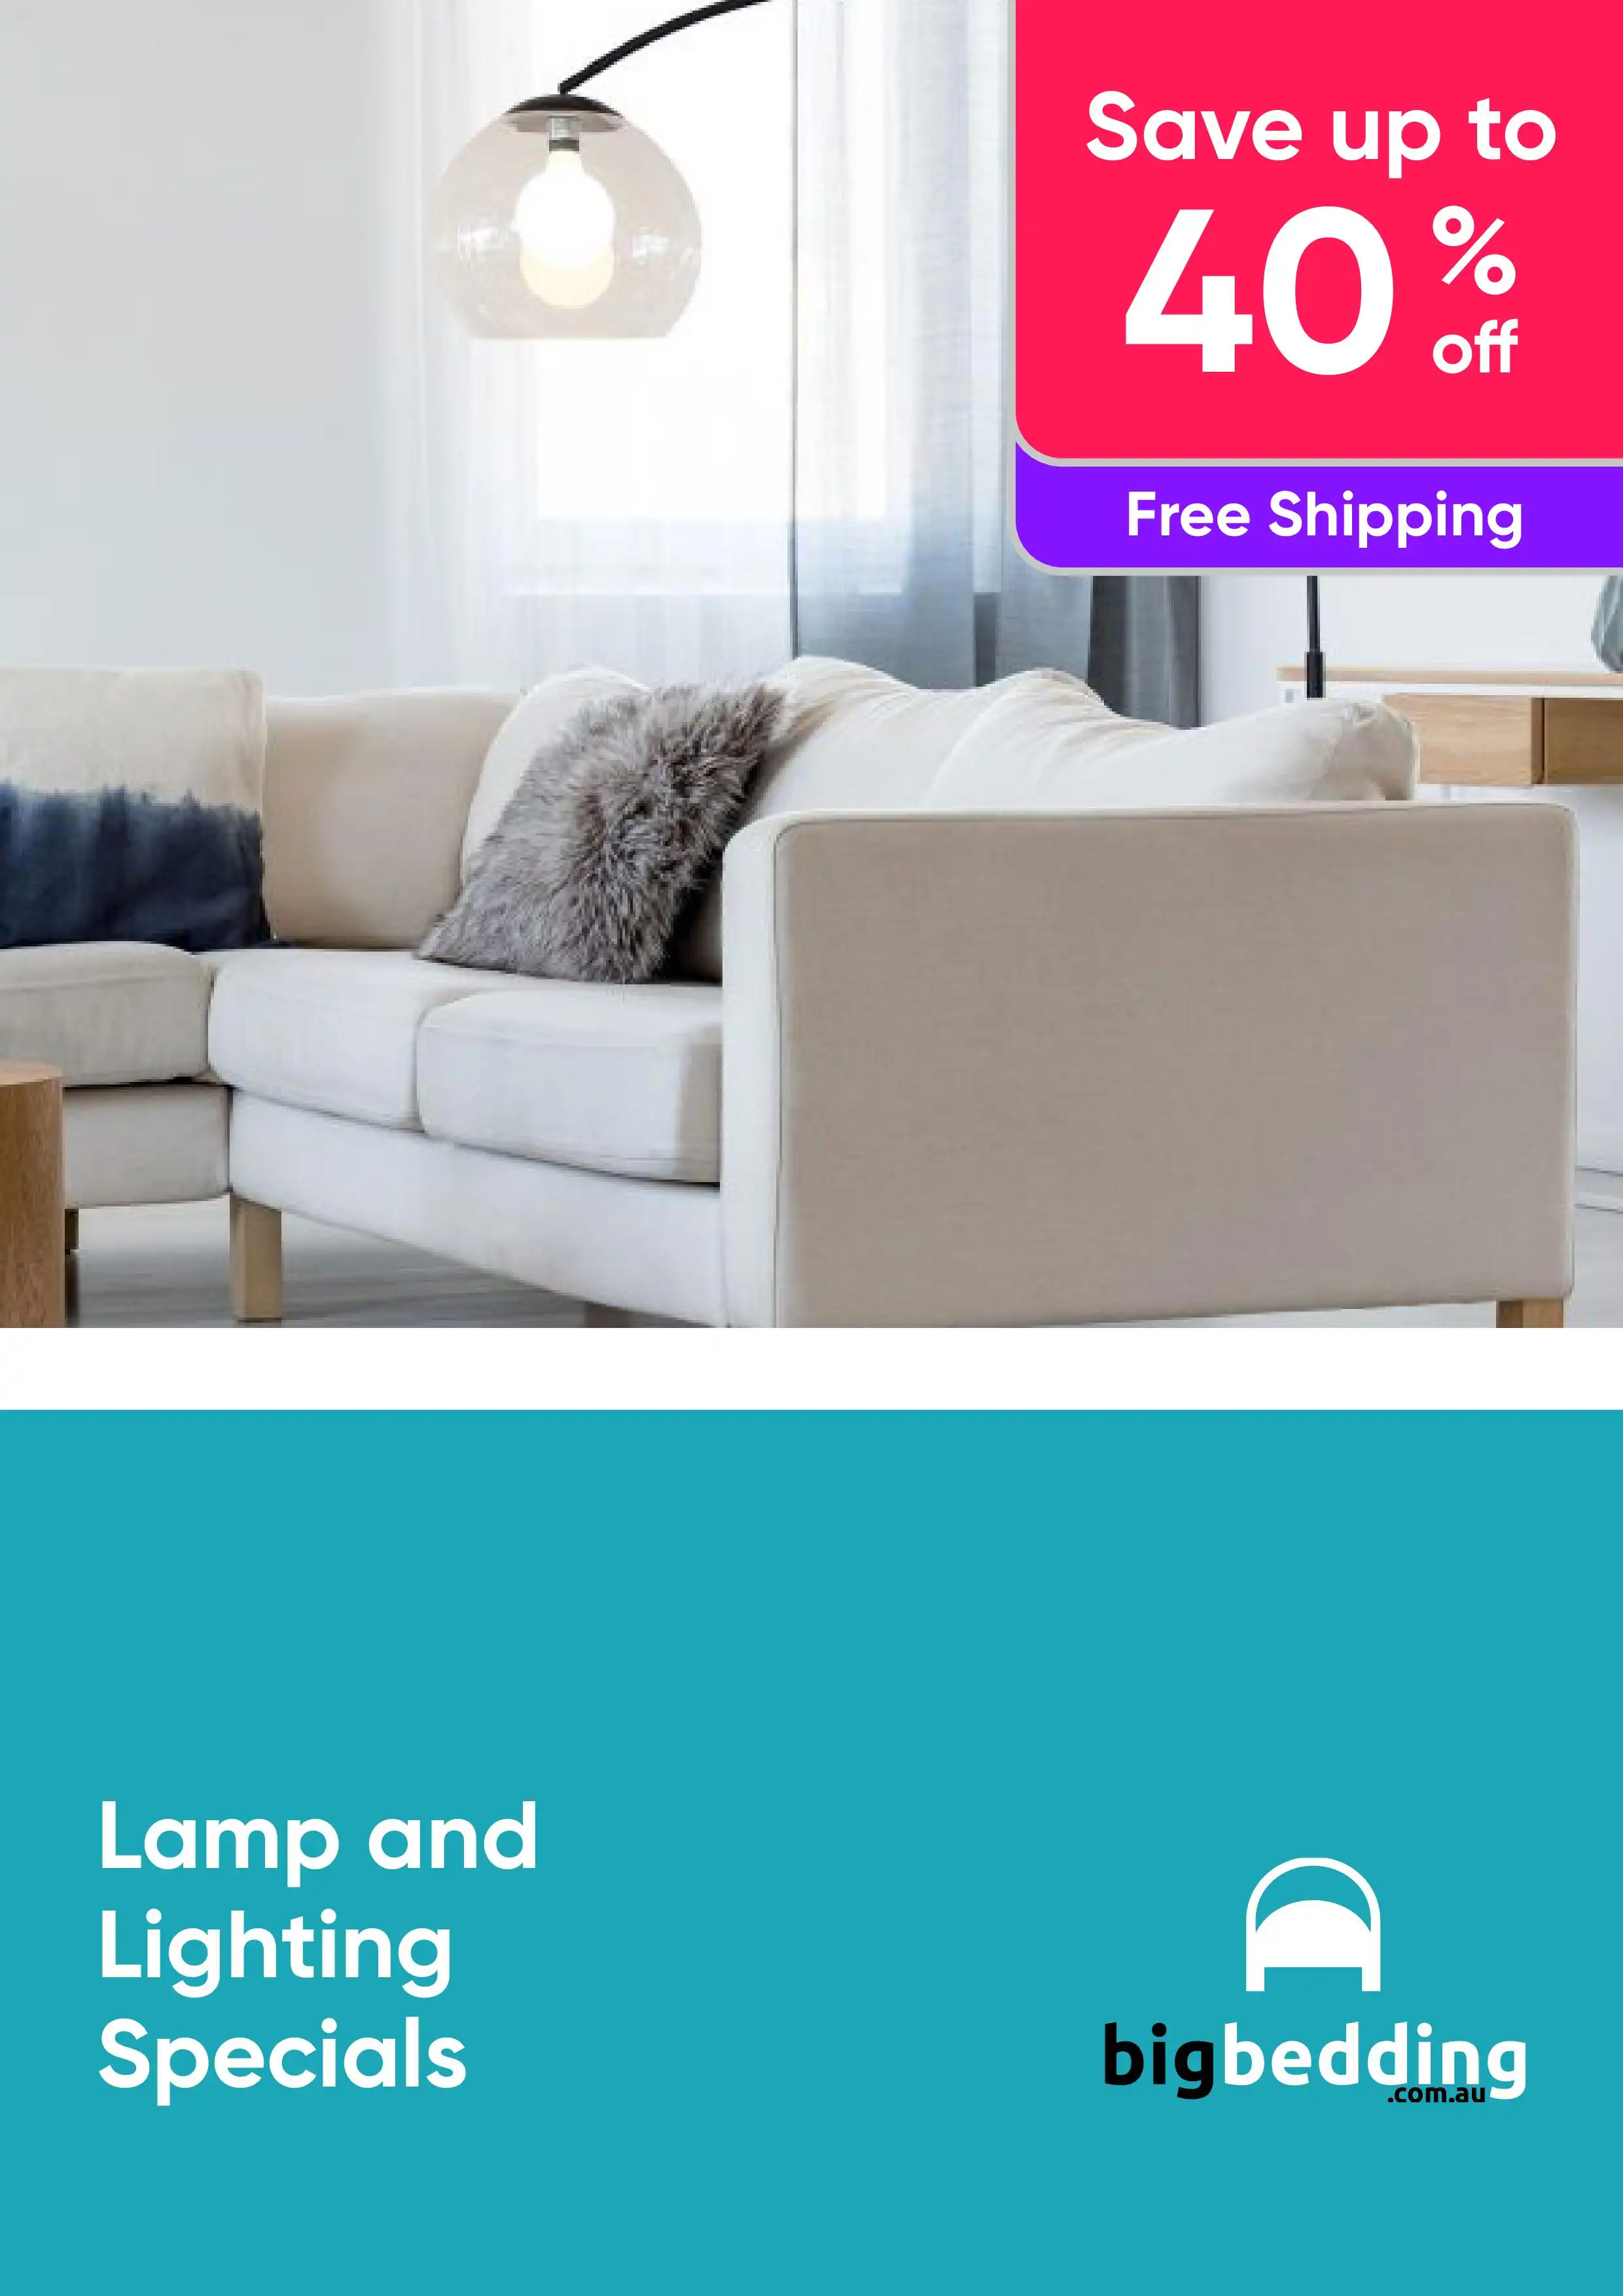 Shop Special on Lamps and Lighting - Save Up To 40% On A Range of Table and Floor Lamps